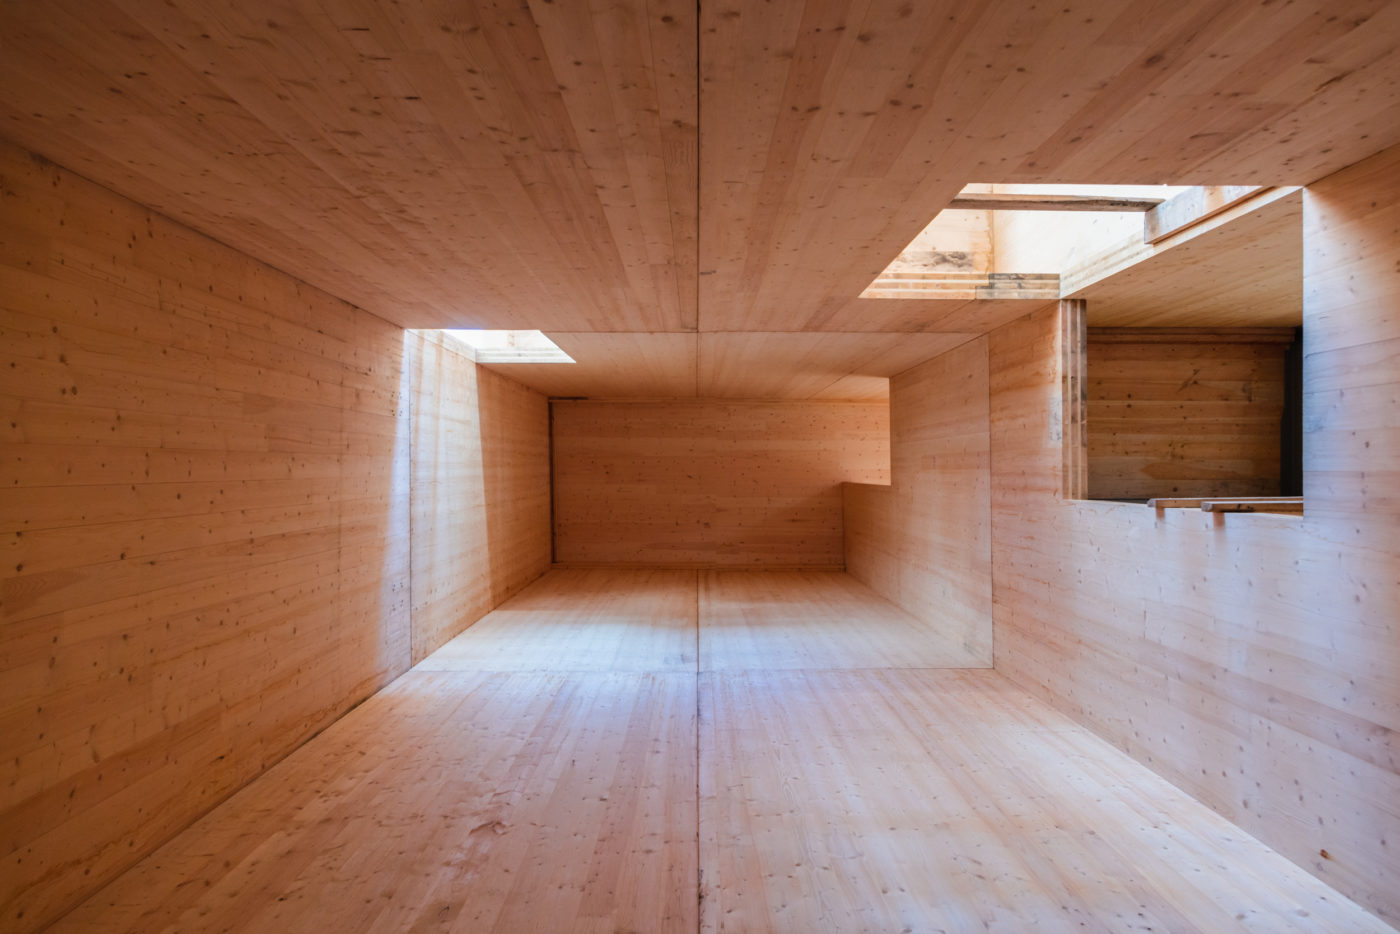 Mass timber installation for the Fast + Epp Home Office